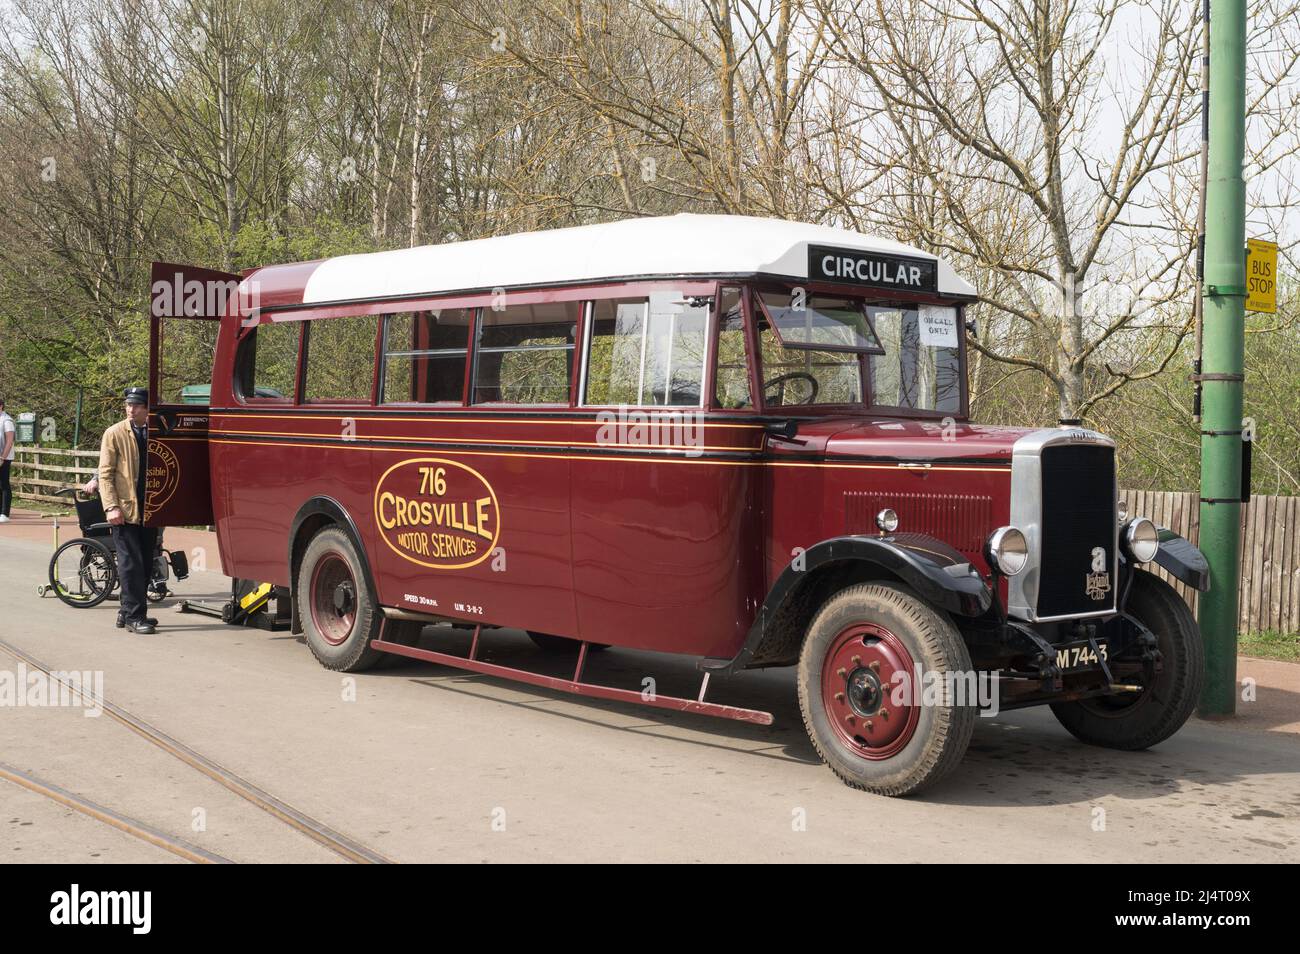 Crosville 716, a 1933 vintage restored  Leyland Cub bus, modified to carry wheelchairs, at Beamish Museum, north east England, UK Stock Photo